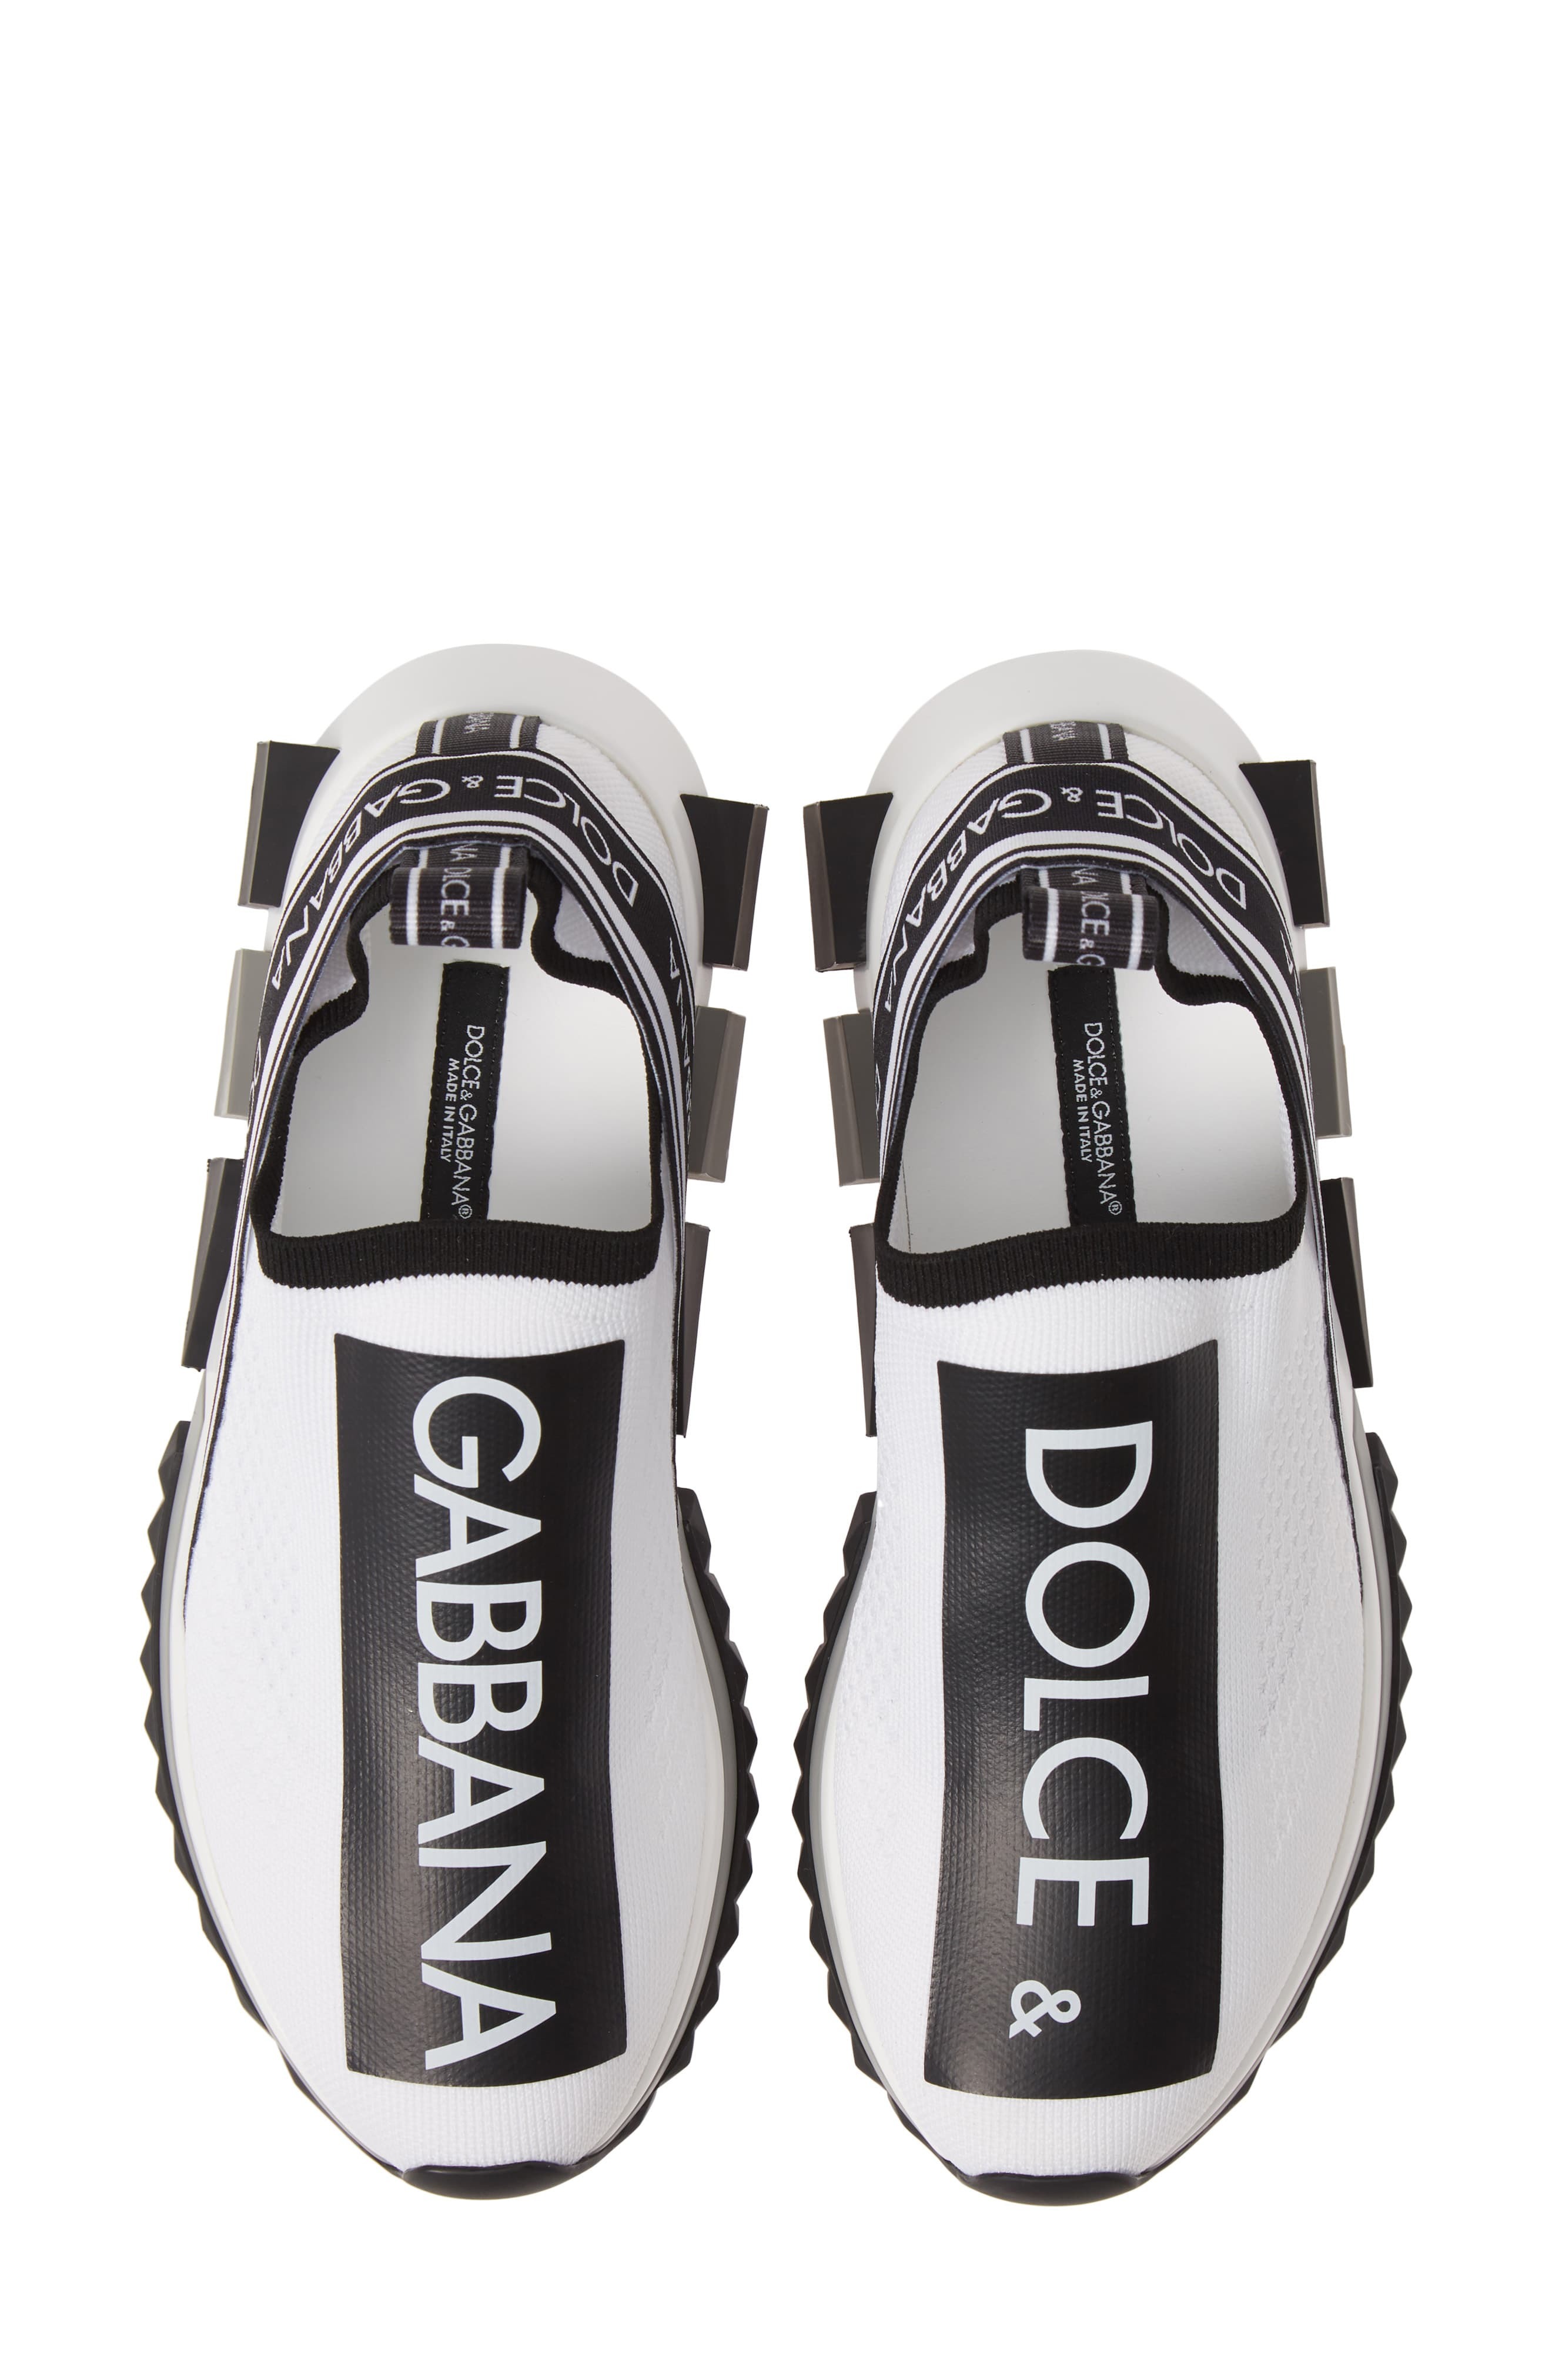 dolce and gabbana sneakers nordstrom